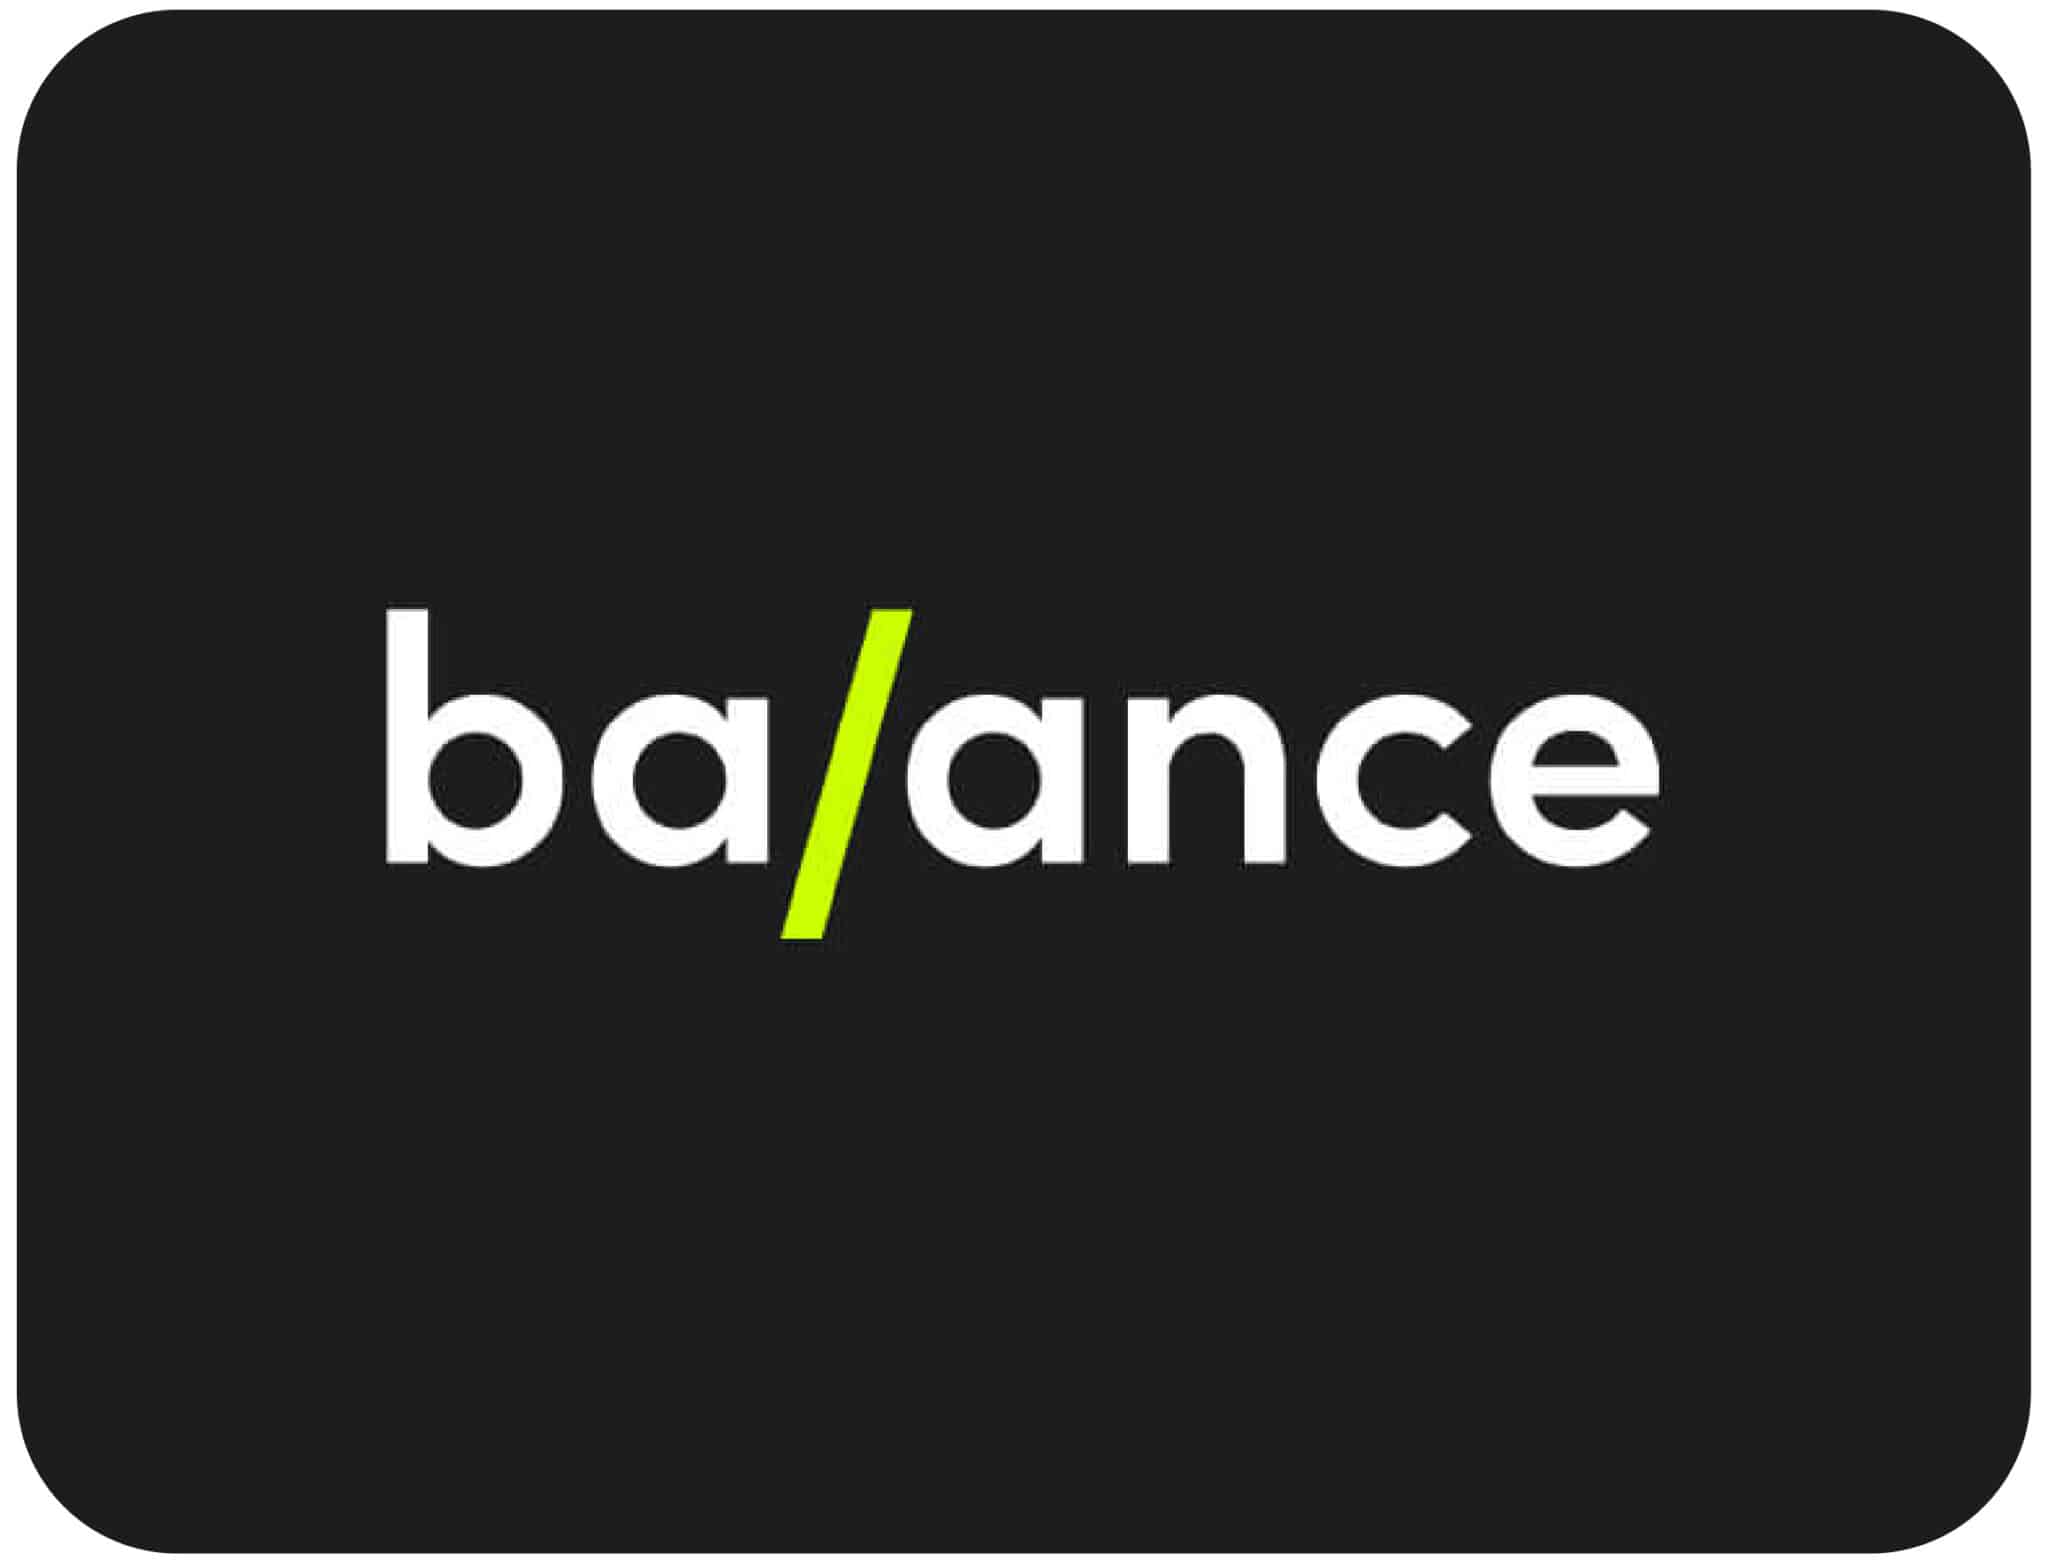 This is the balance logo